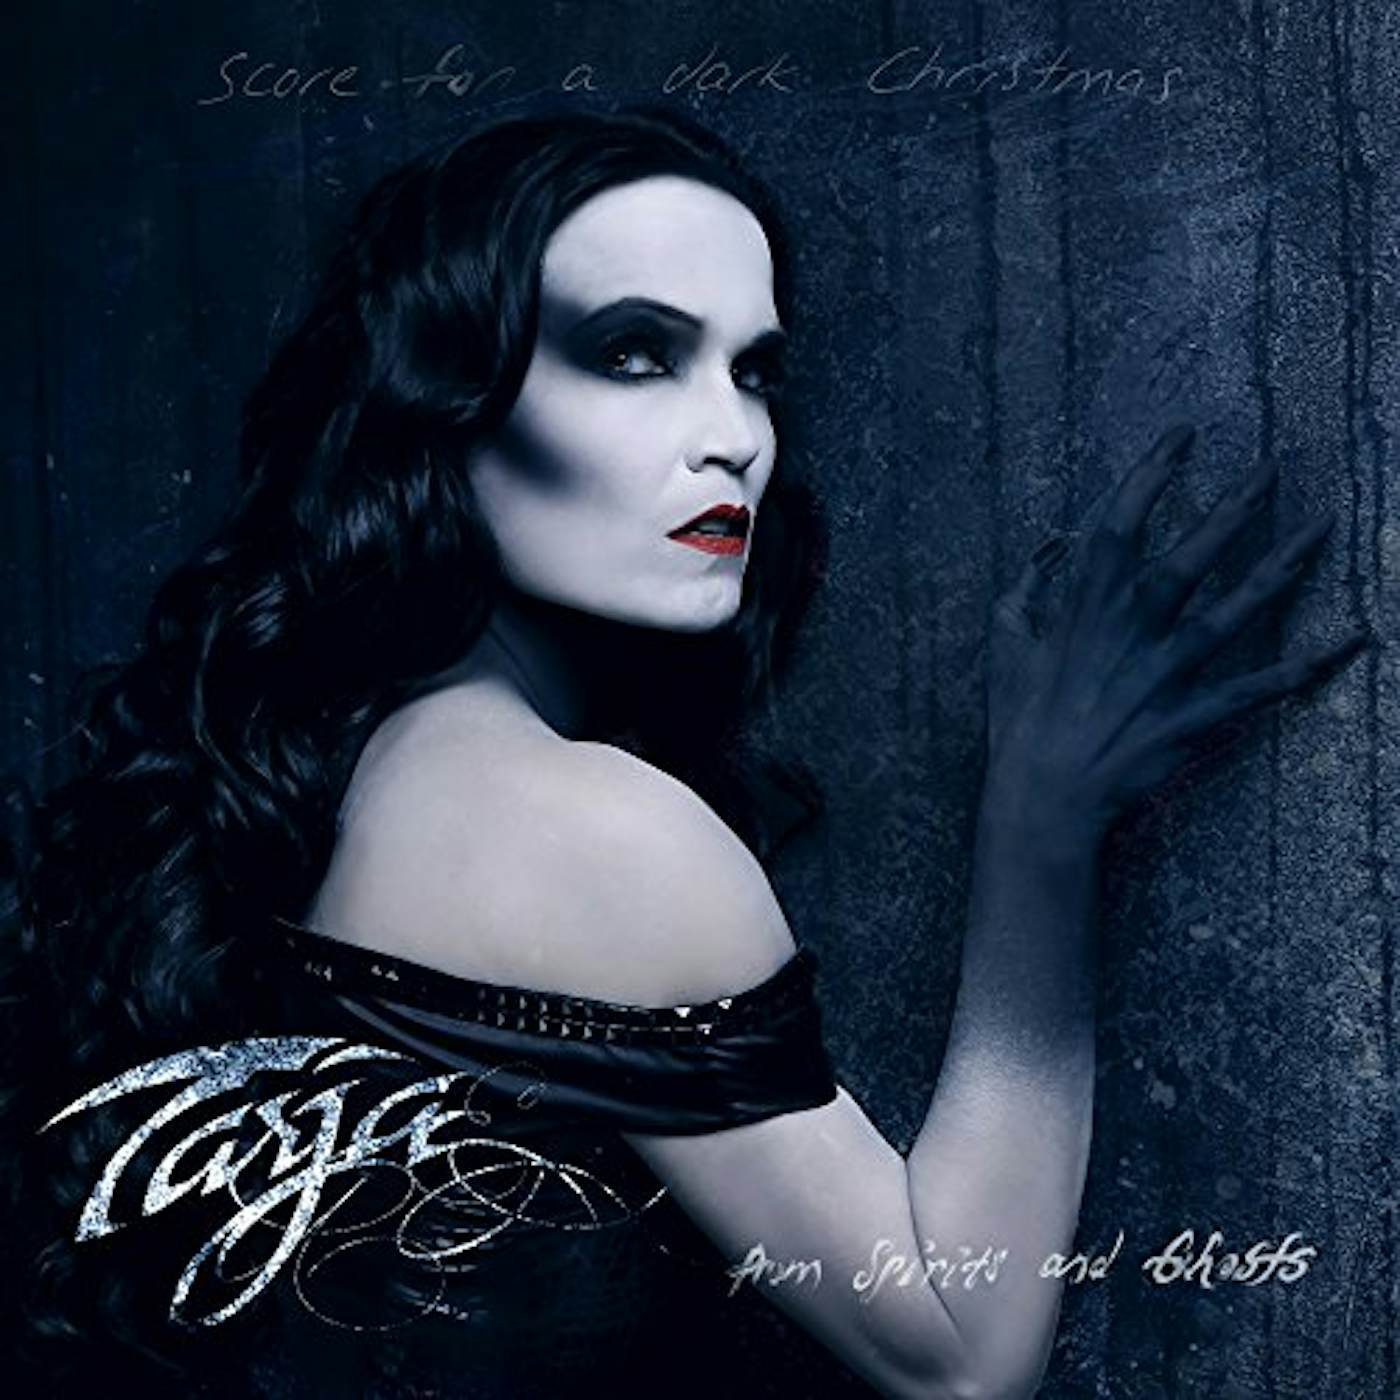 Tarja From Spirits and Ghosts (Score For A Dark Christmas) Vinyl Record